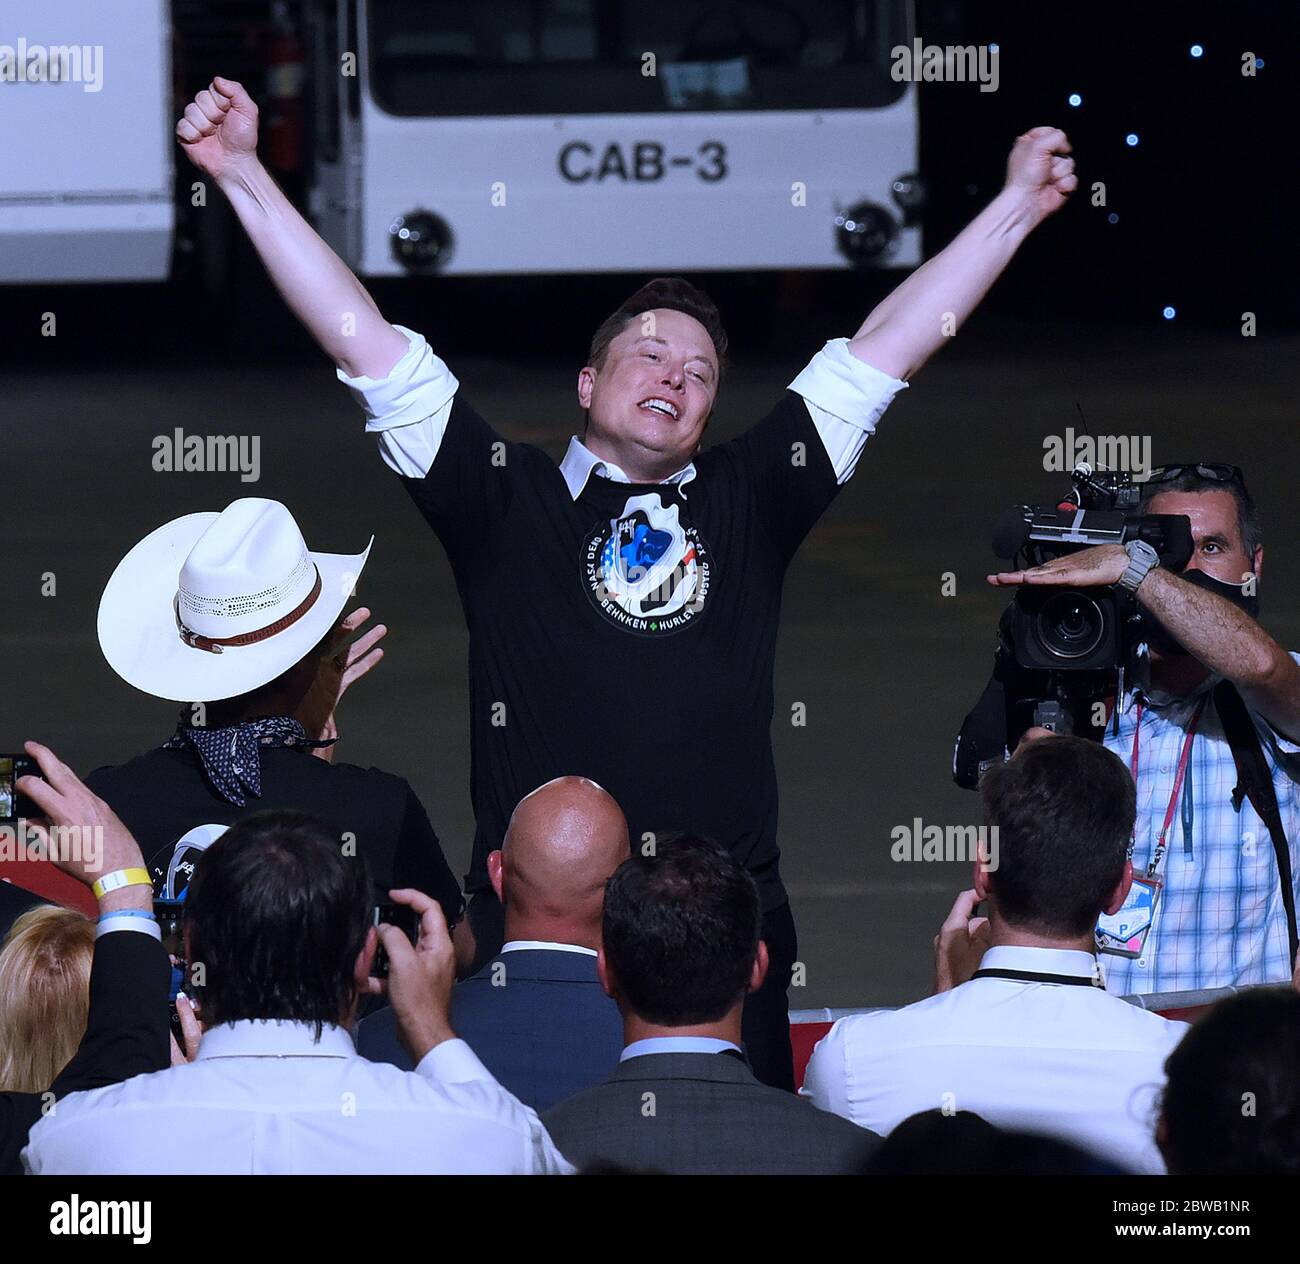 Cape Canaveral, United States. 30th May, 2020. SpaceX founder Elon Musk celebrates after being recognized by U.S. Vice President Mike Pence at NASA's Vehicle Assembly Building following the successful launch of a Falcon 9 rocket with the Crew Dragon spacecraft from pad 39A at the Kennedy Space Center.NASA astronauts Doug Hurley and Bob Behnken will rendezvous and dock with the International Space Station, becoming the first people to launch into space from American soil since the end of the Space Shuttle program in 2011. Credit: SOPA Images Limited/Alamy Live News Stock Photo